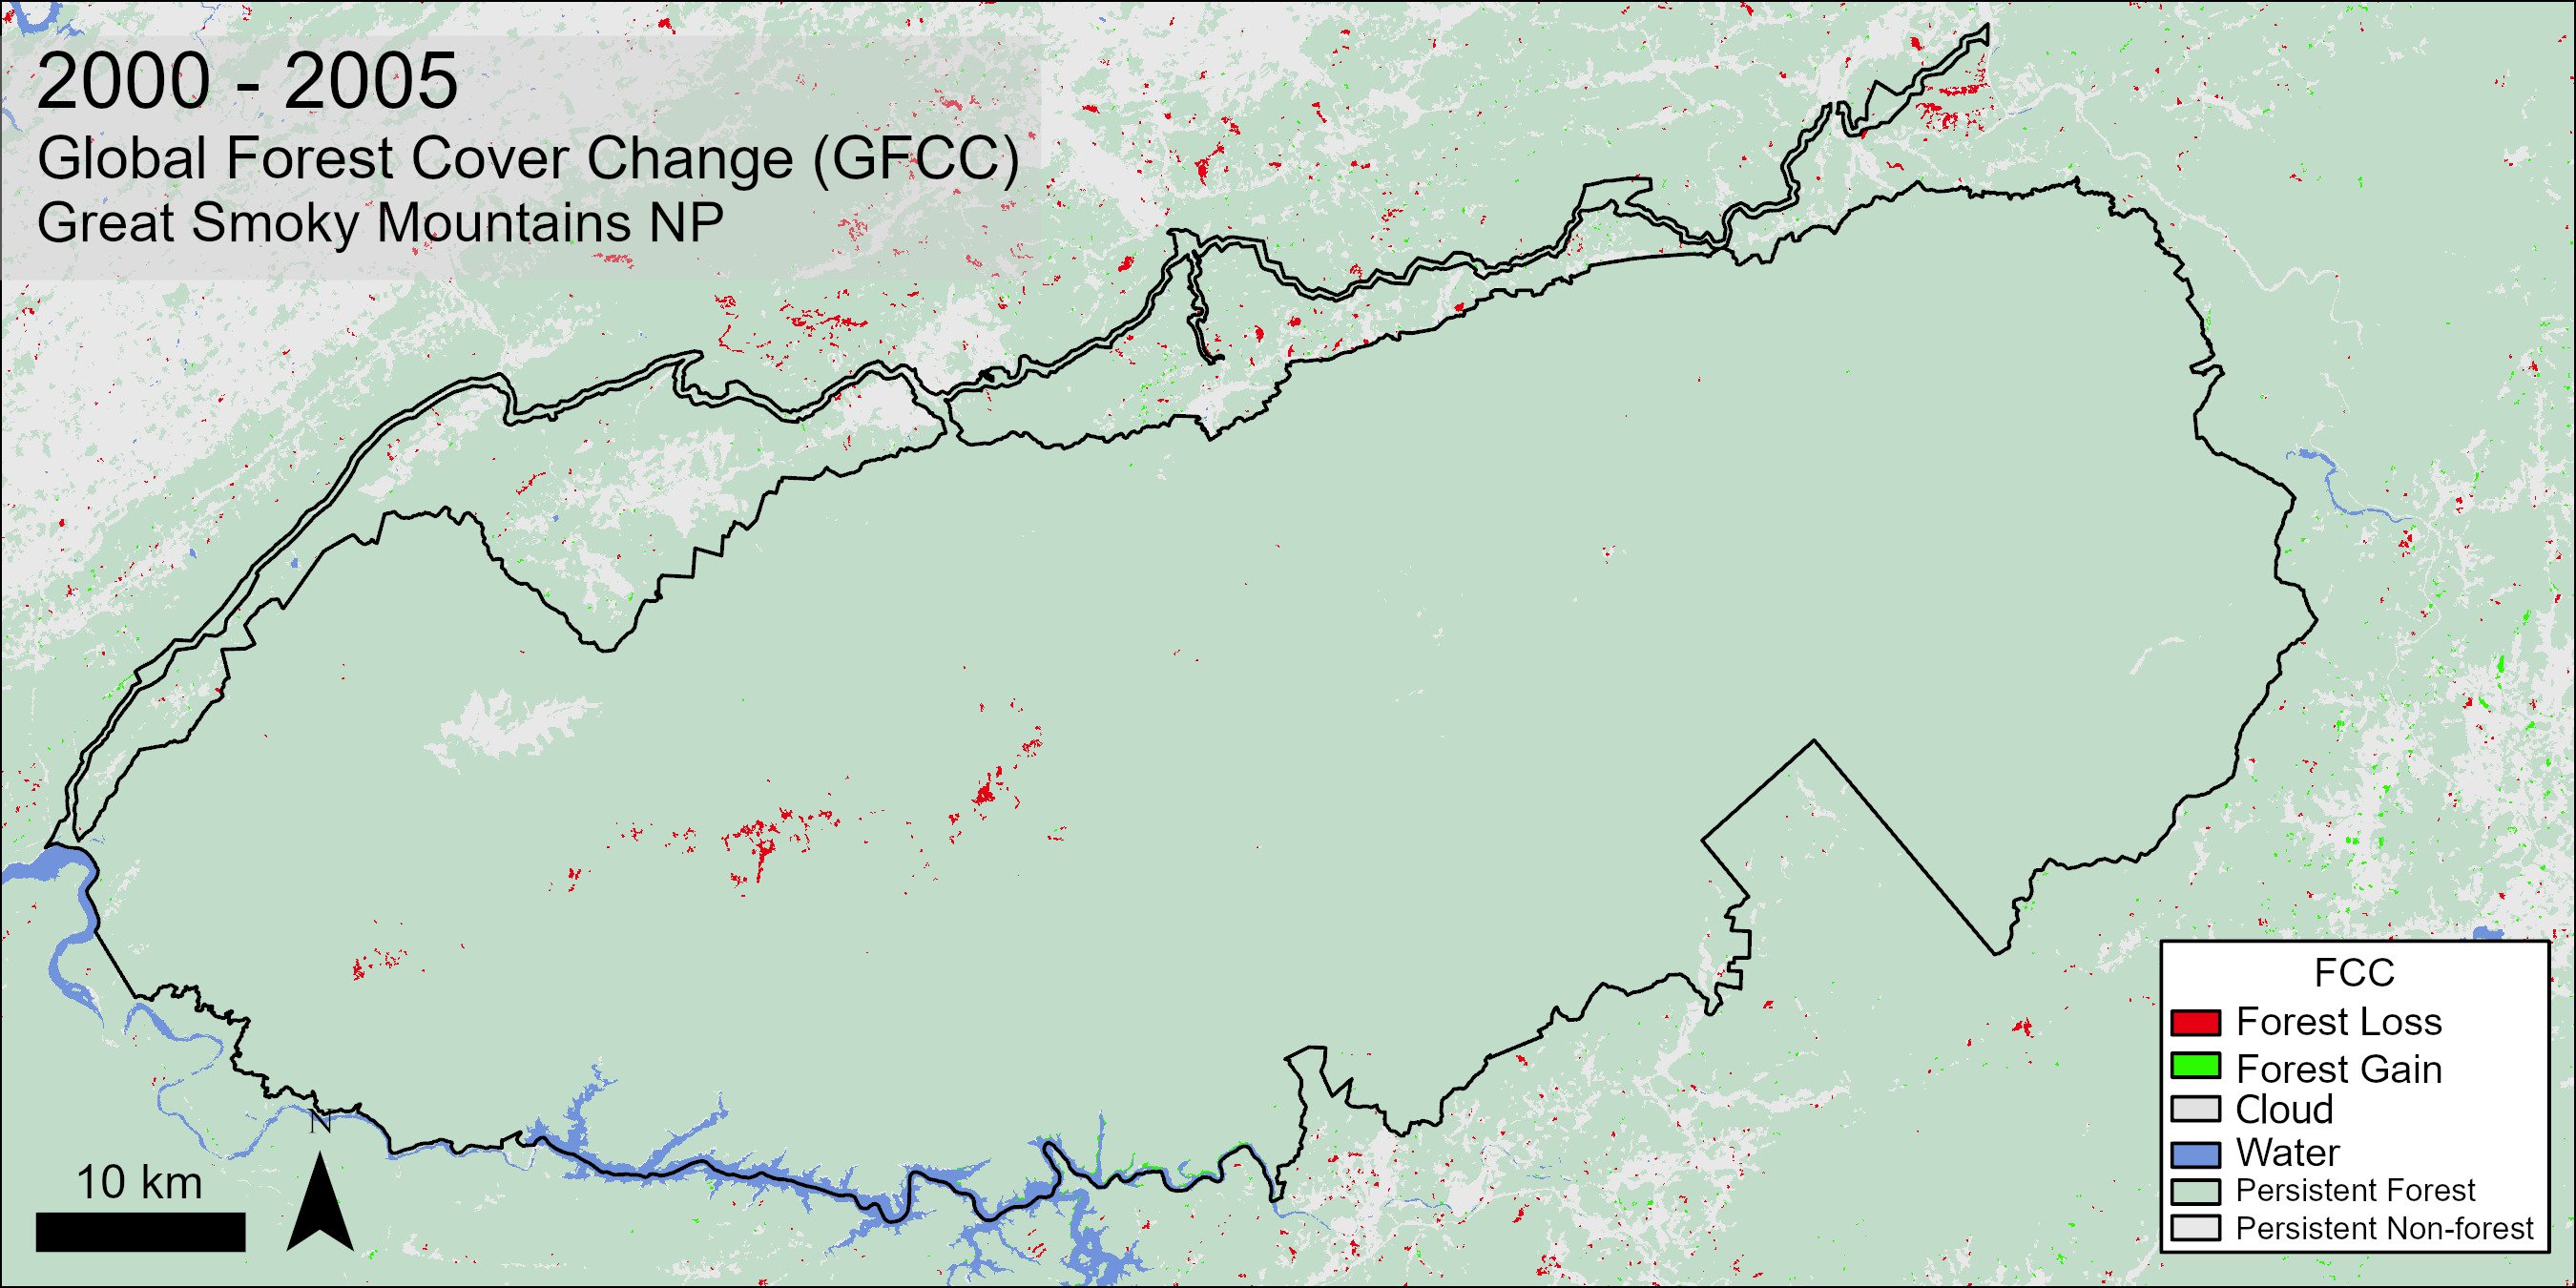 Global Forest Cover Change data over Great Smoky Mountain National Park.